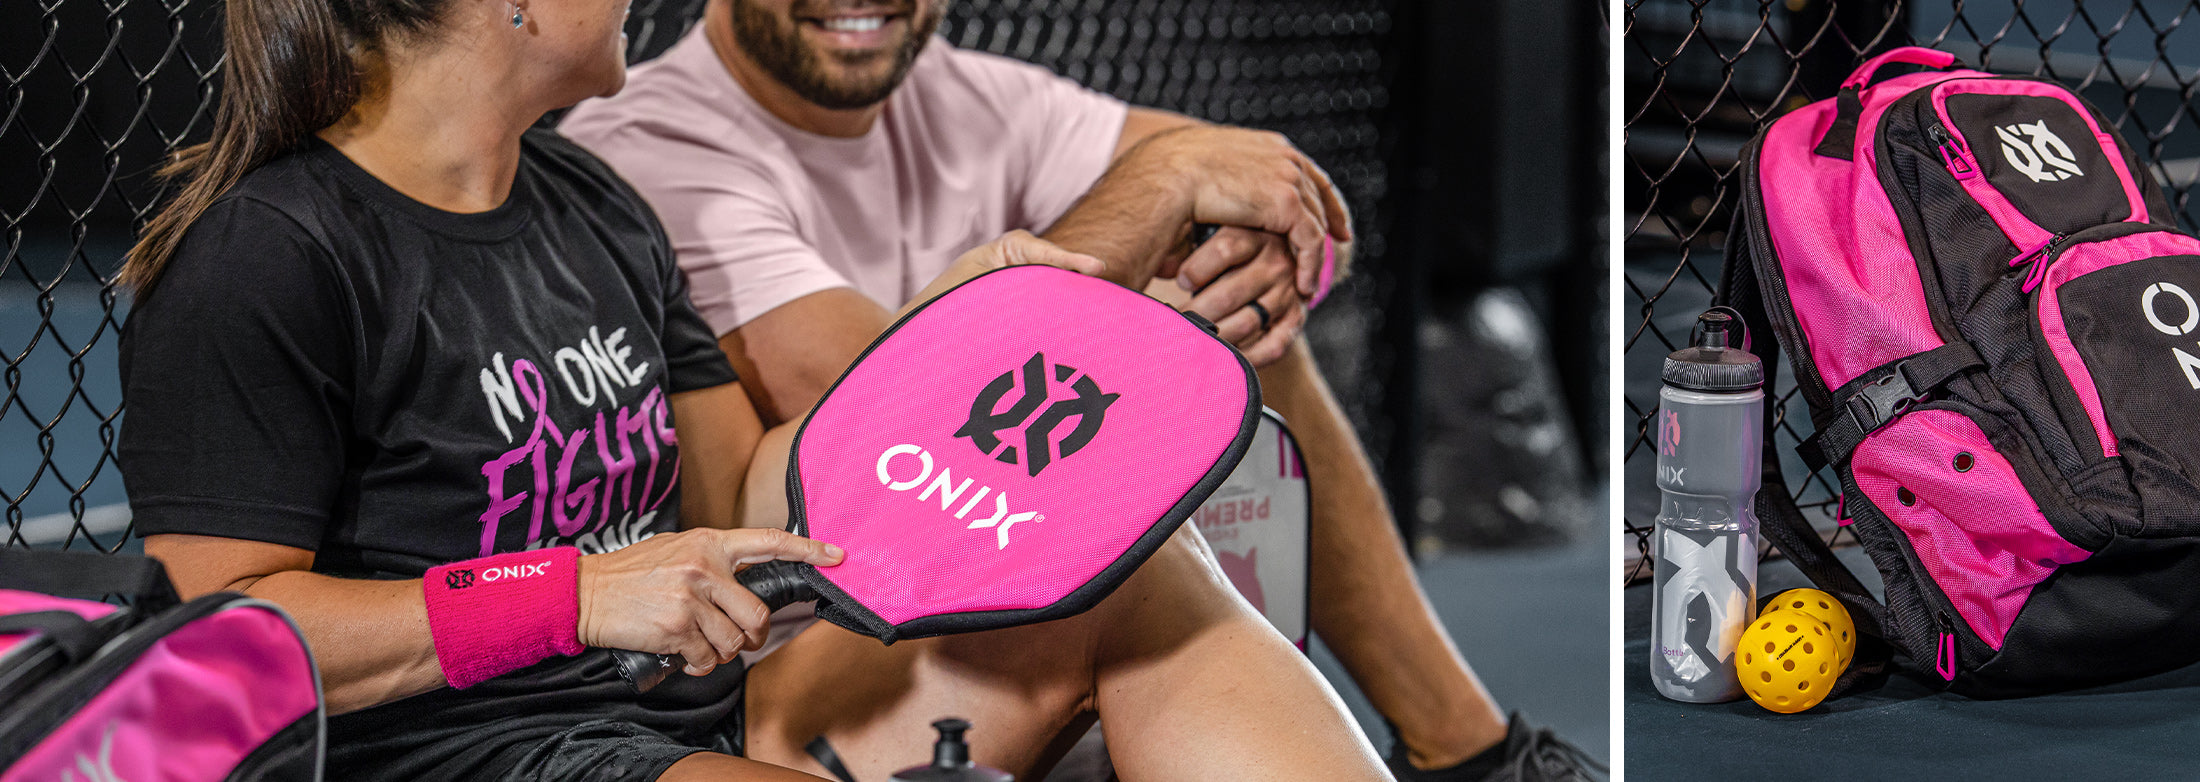 onix pickleball paddle for a purpose pink wristbands and pink pickleball backpack